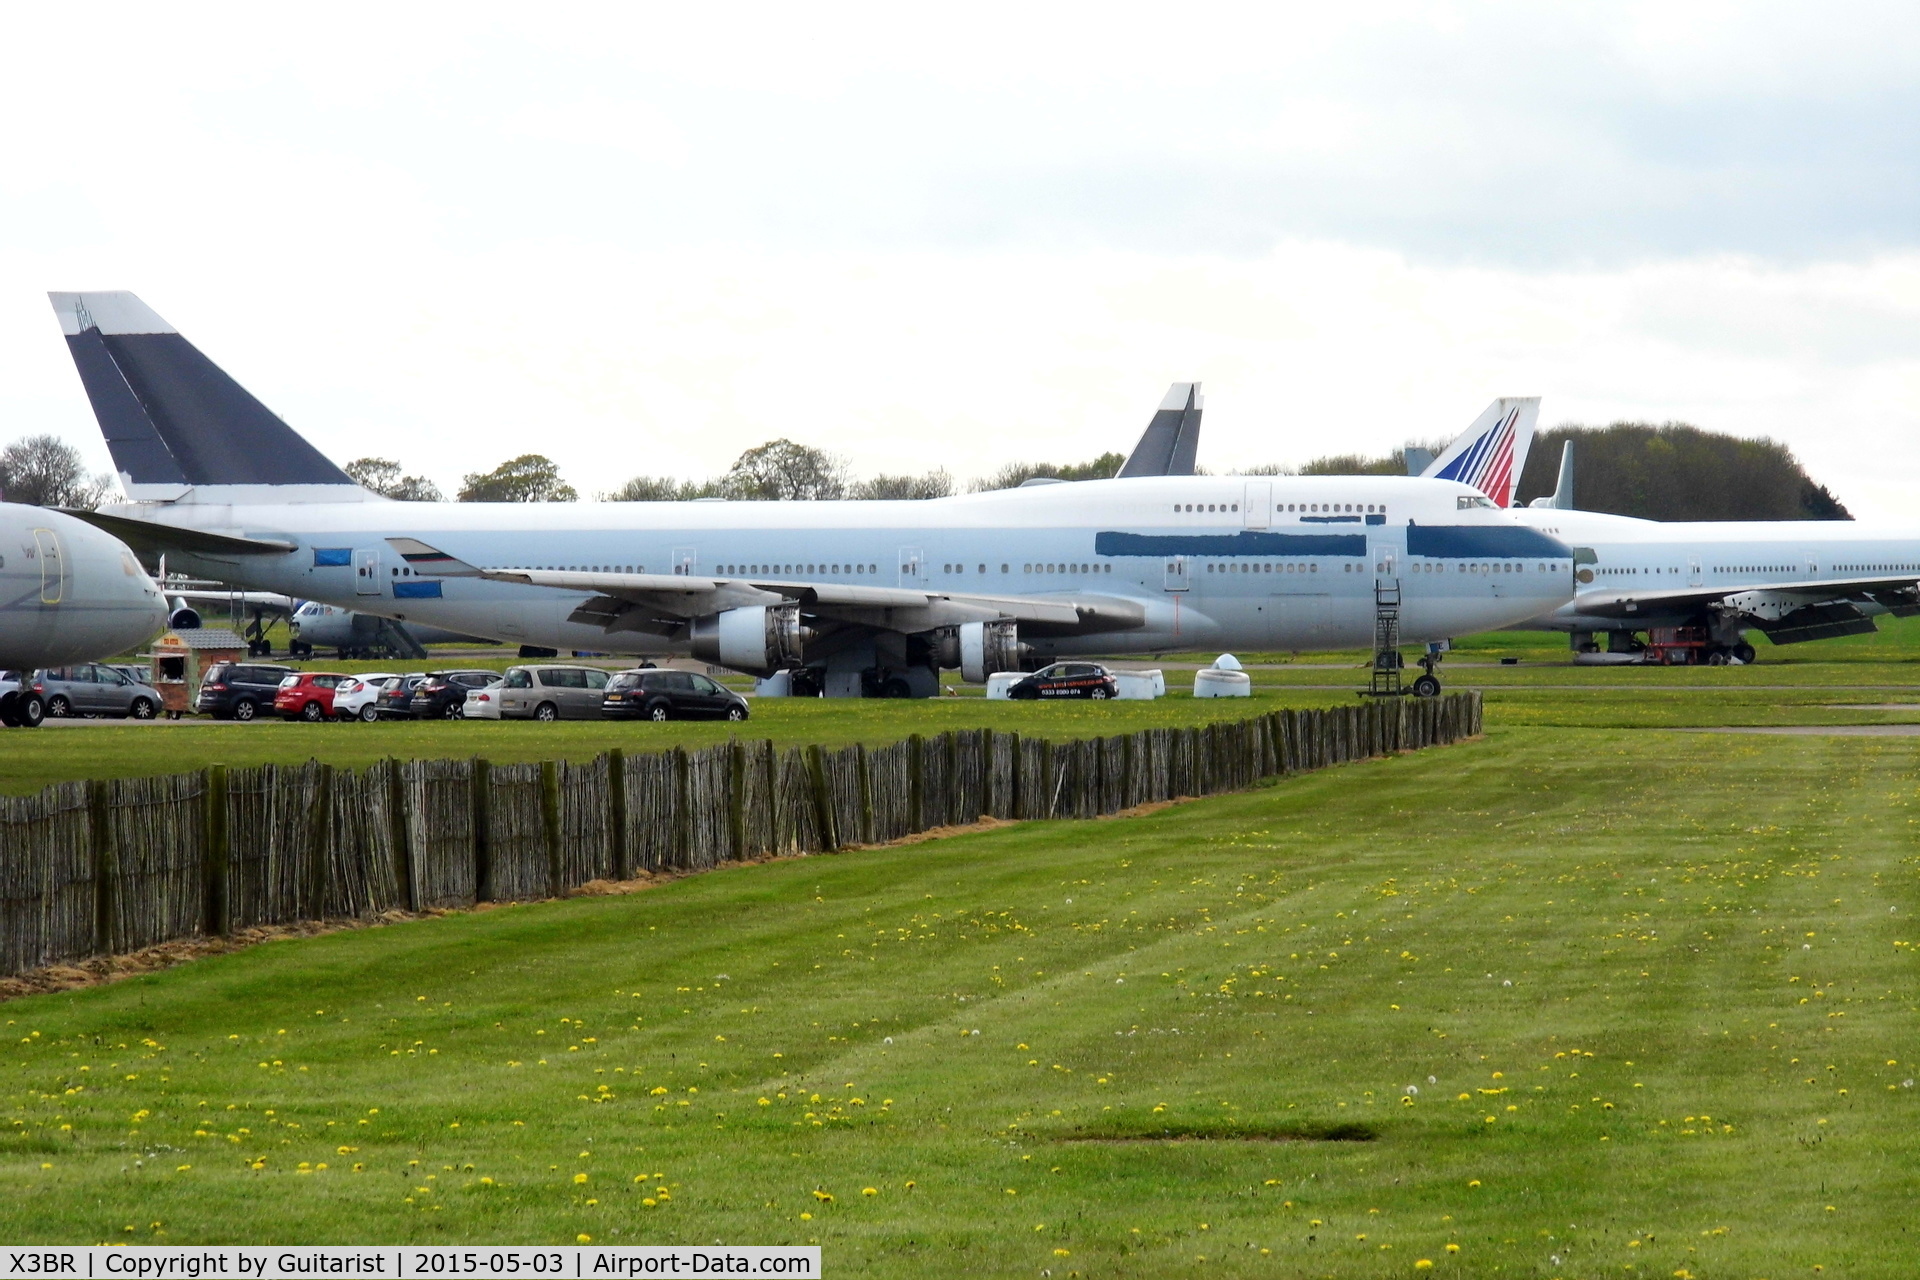 X3BR Airport - Being slowly dismantled at Bruntingthorpe